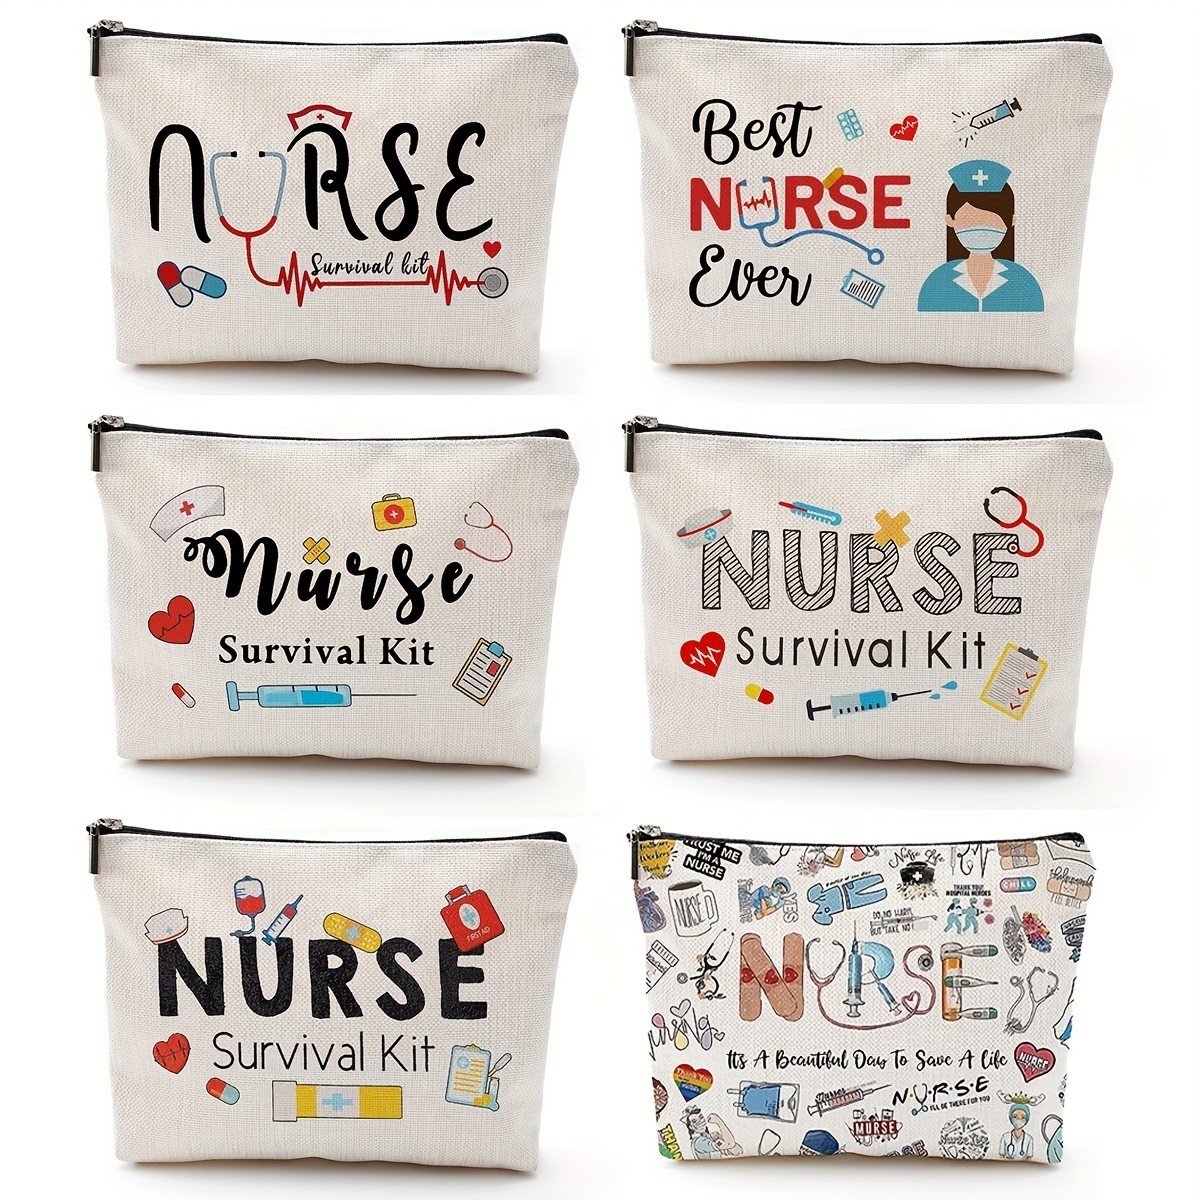 Practical Gifts for Nurses They Will Actually Appreciate